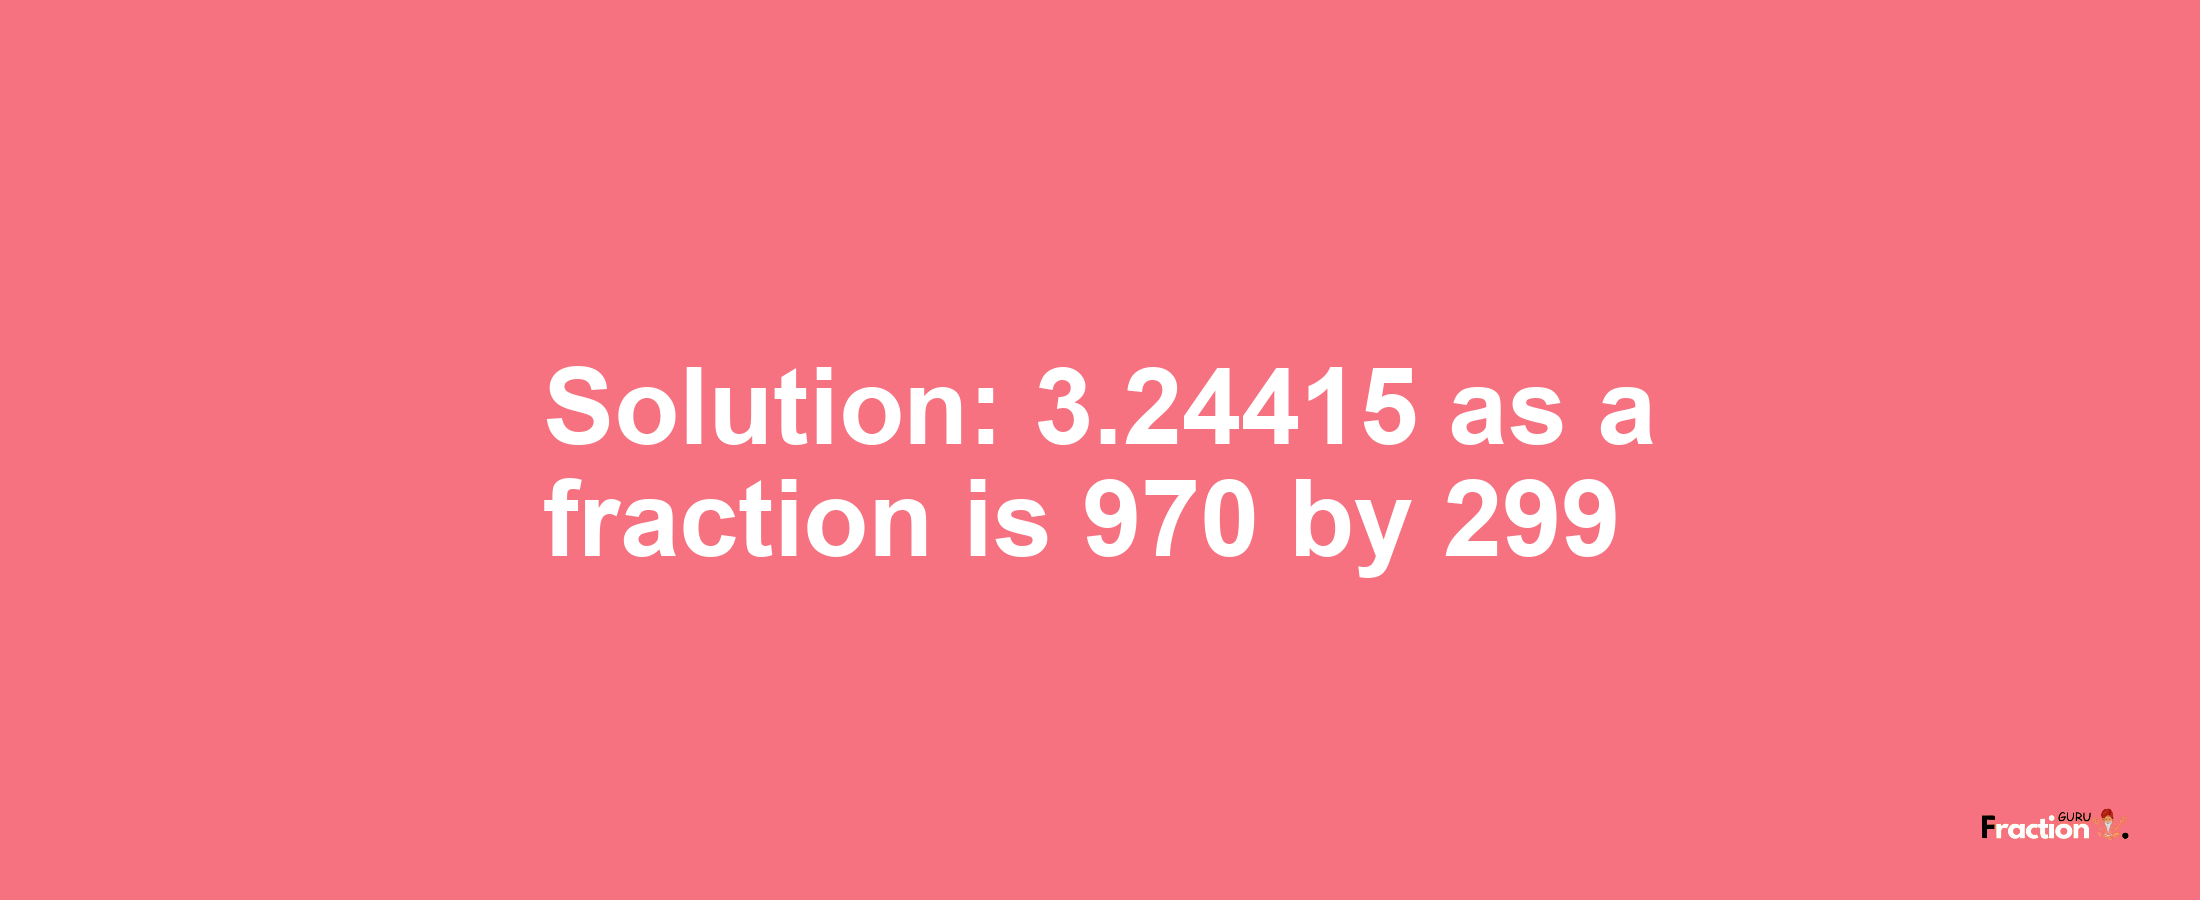 Solution:3.24415 as a fraction is 970/299